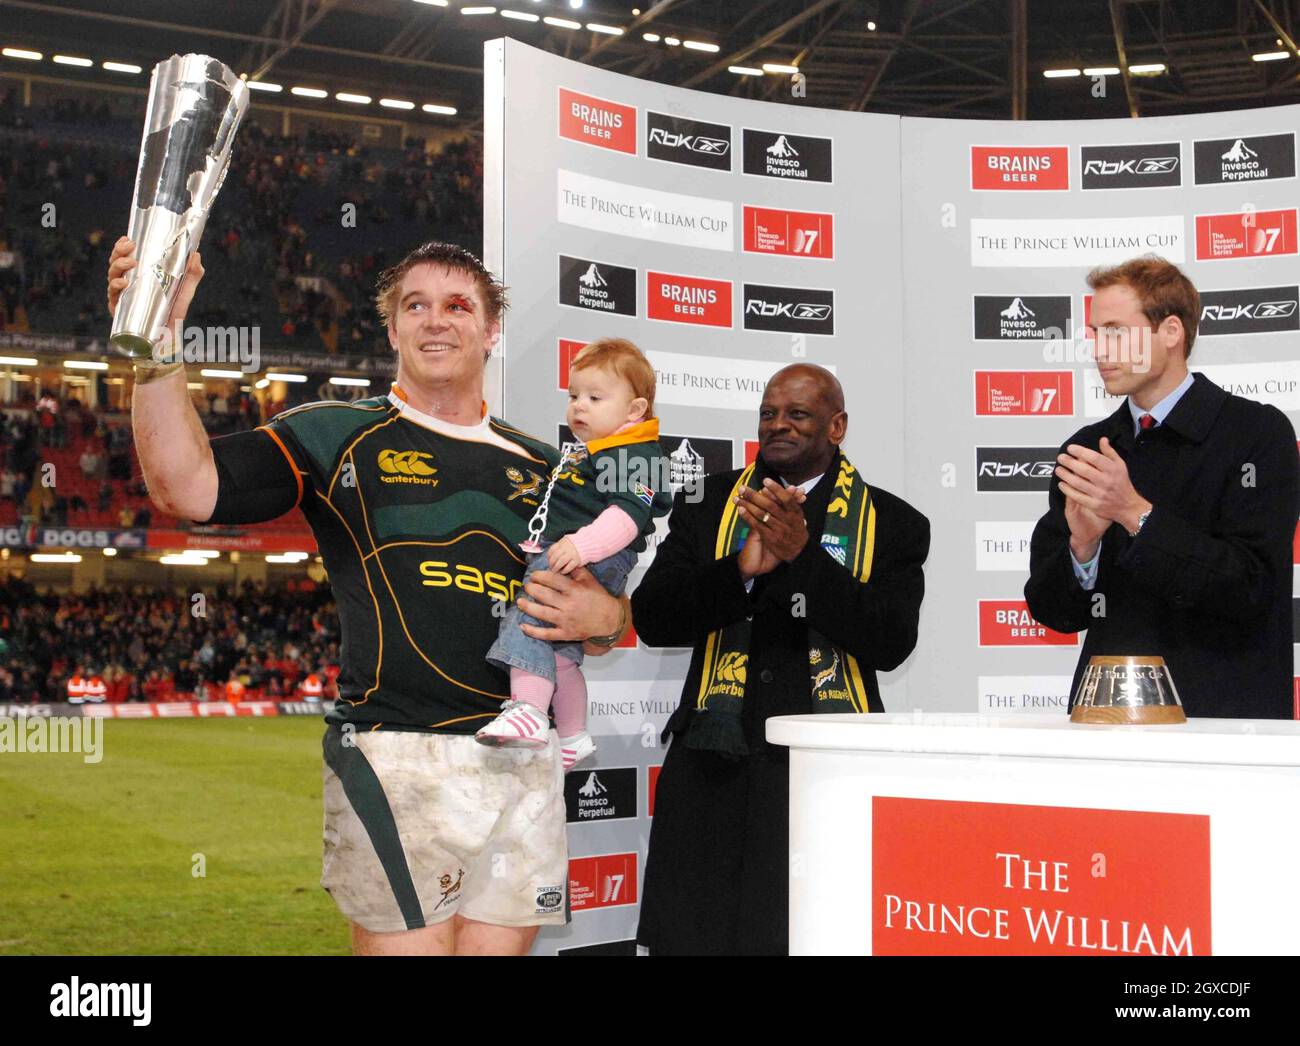 South Africa's rugby team captain John Smit holds his daughter Emma after collecting the Prince William Cup from Prince William, as chairman of the SA Rugby Union Mpumeleo Tshume looks on, following South Africa winning the inaugural Wales v South Africa Prince William Cup match at the Millennium Stadium, Cardiff on November 24, 2007. Stock Photo